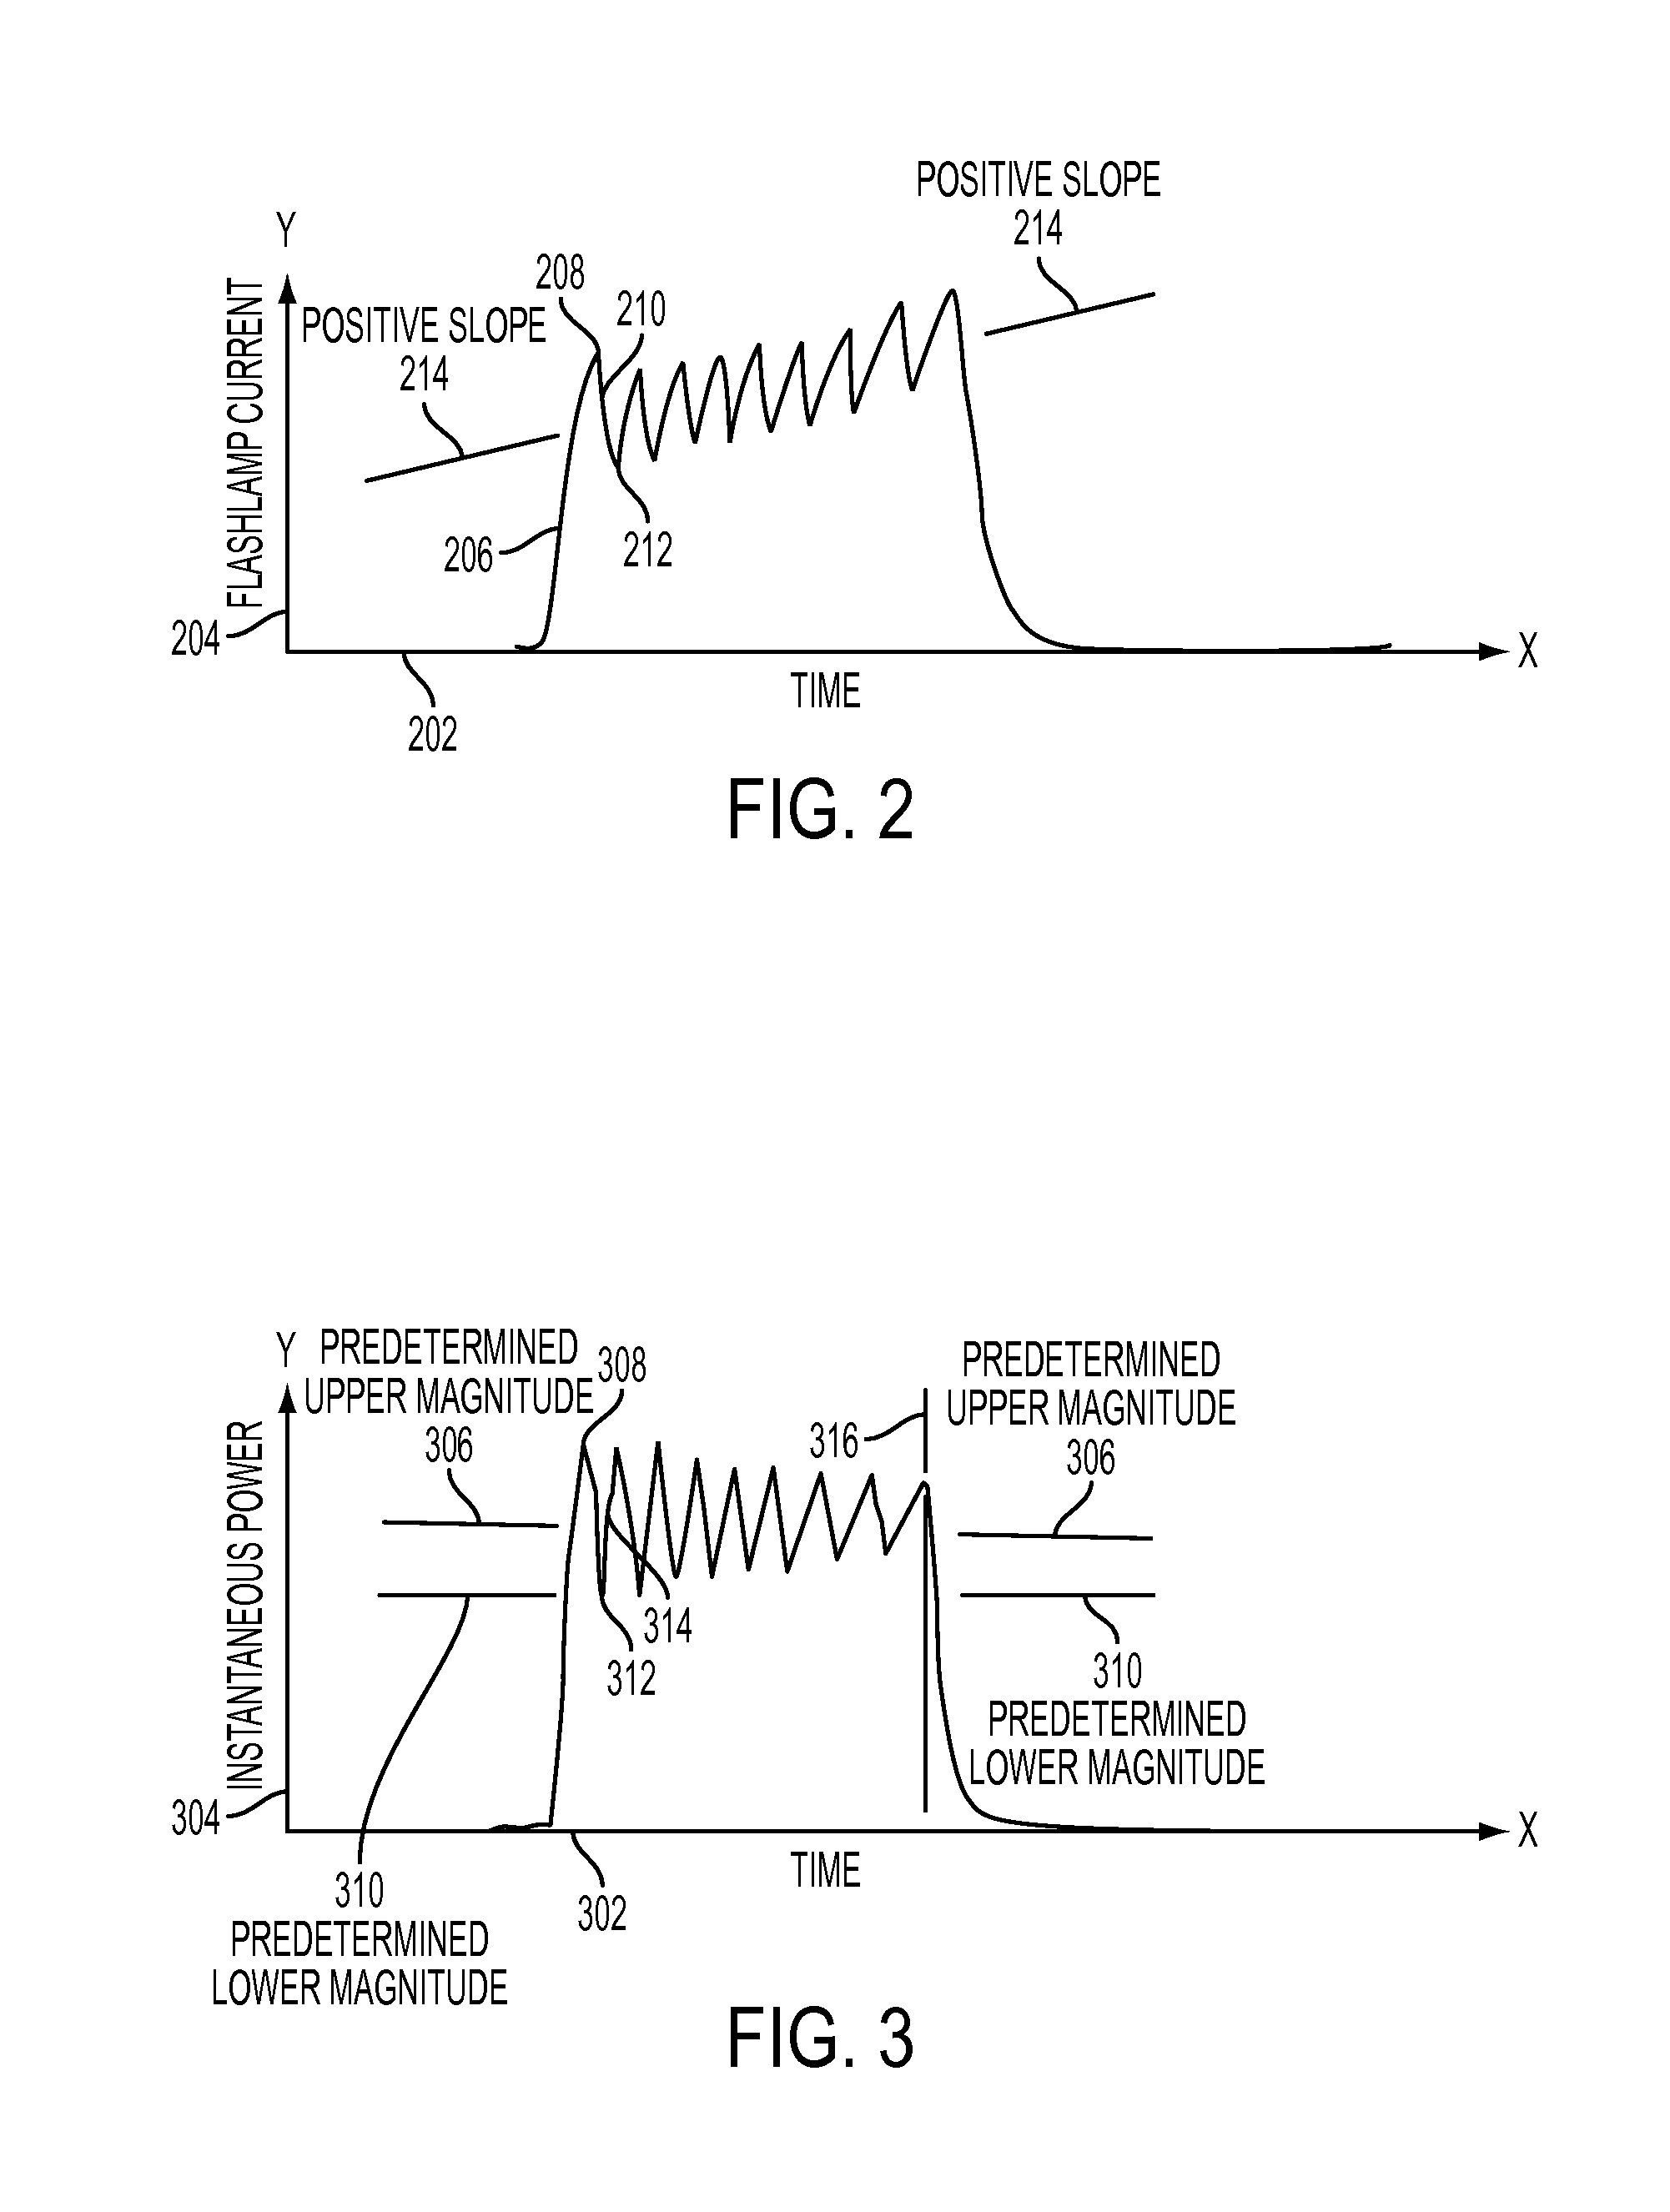 Voltage bucking circuit for driving flashlamp-pumped lasers for treating skin